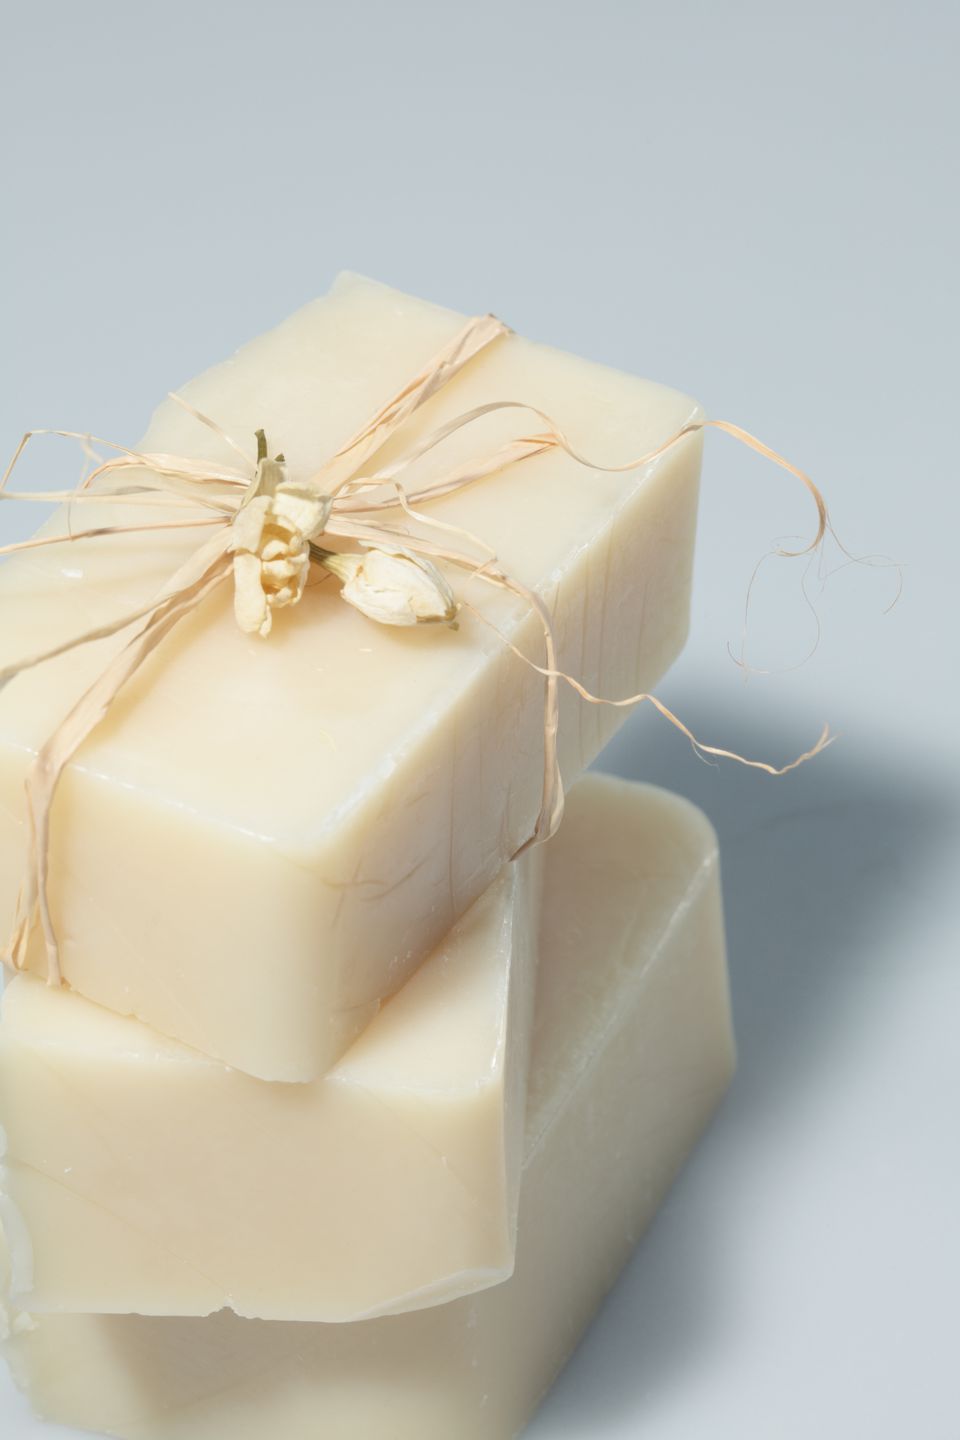 Basic and Easy Homemade Soap Making Recipes